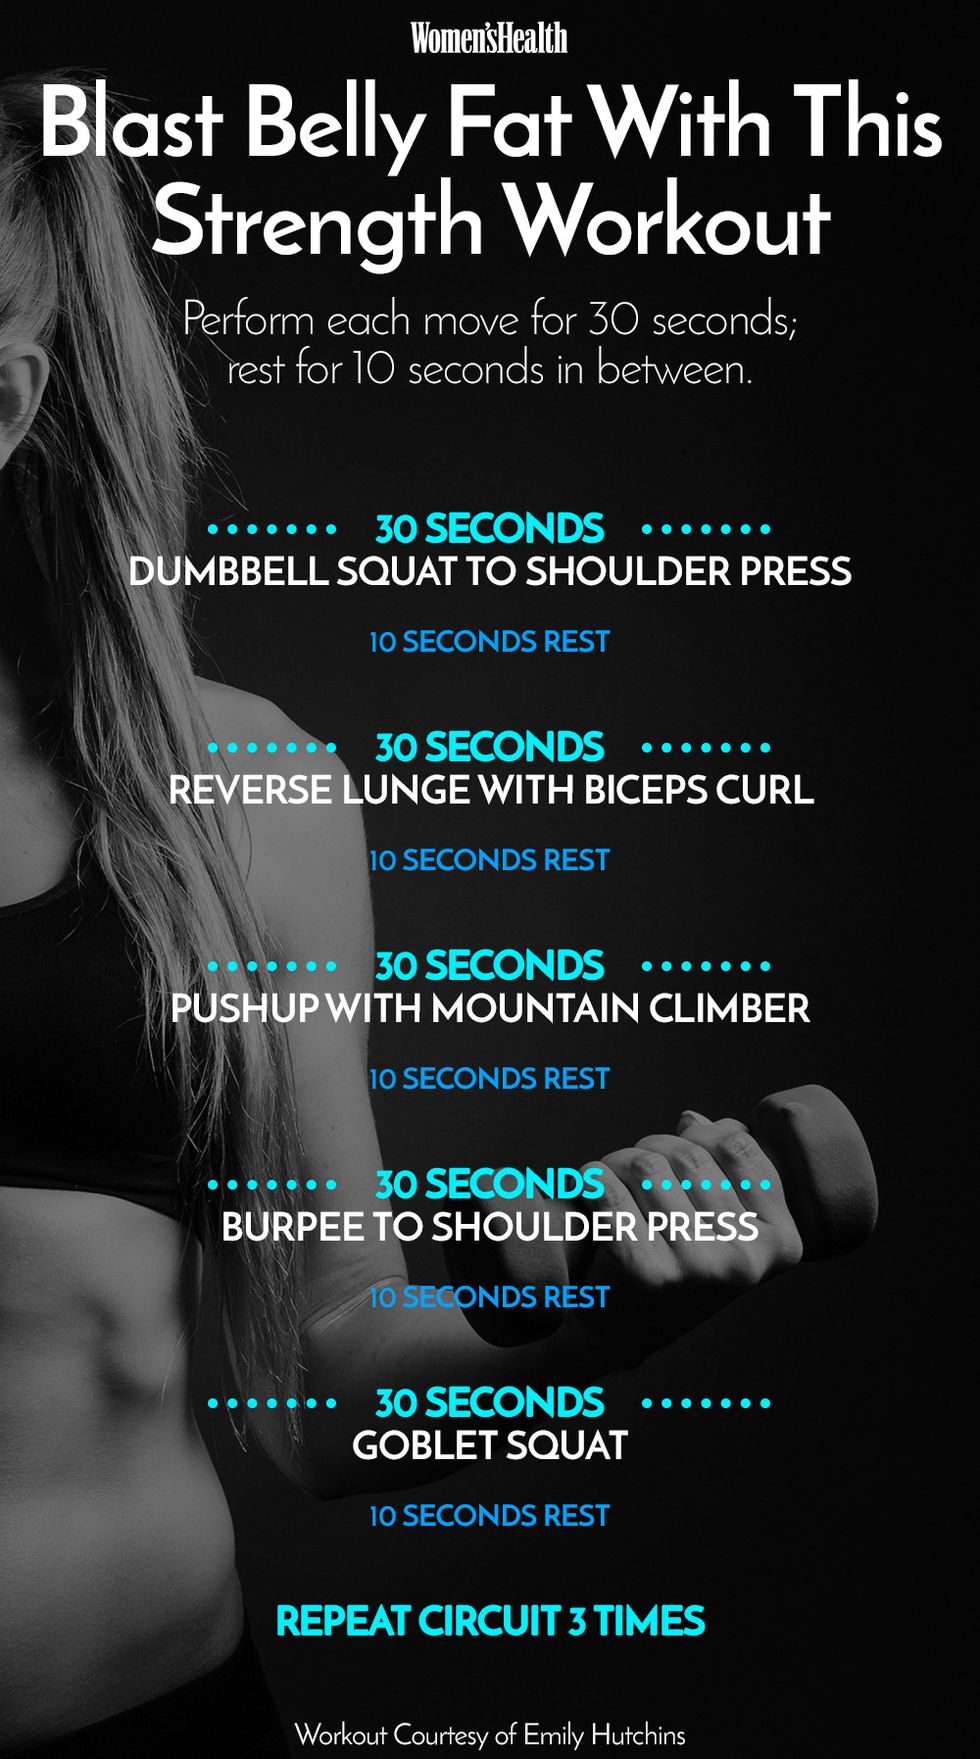 strength workout belly fat 